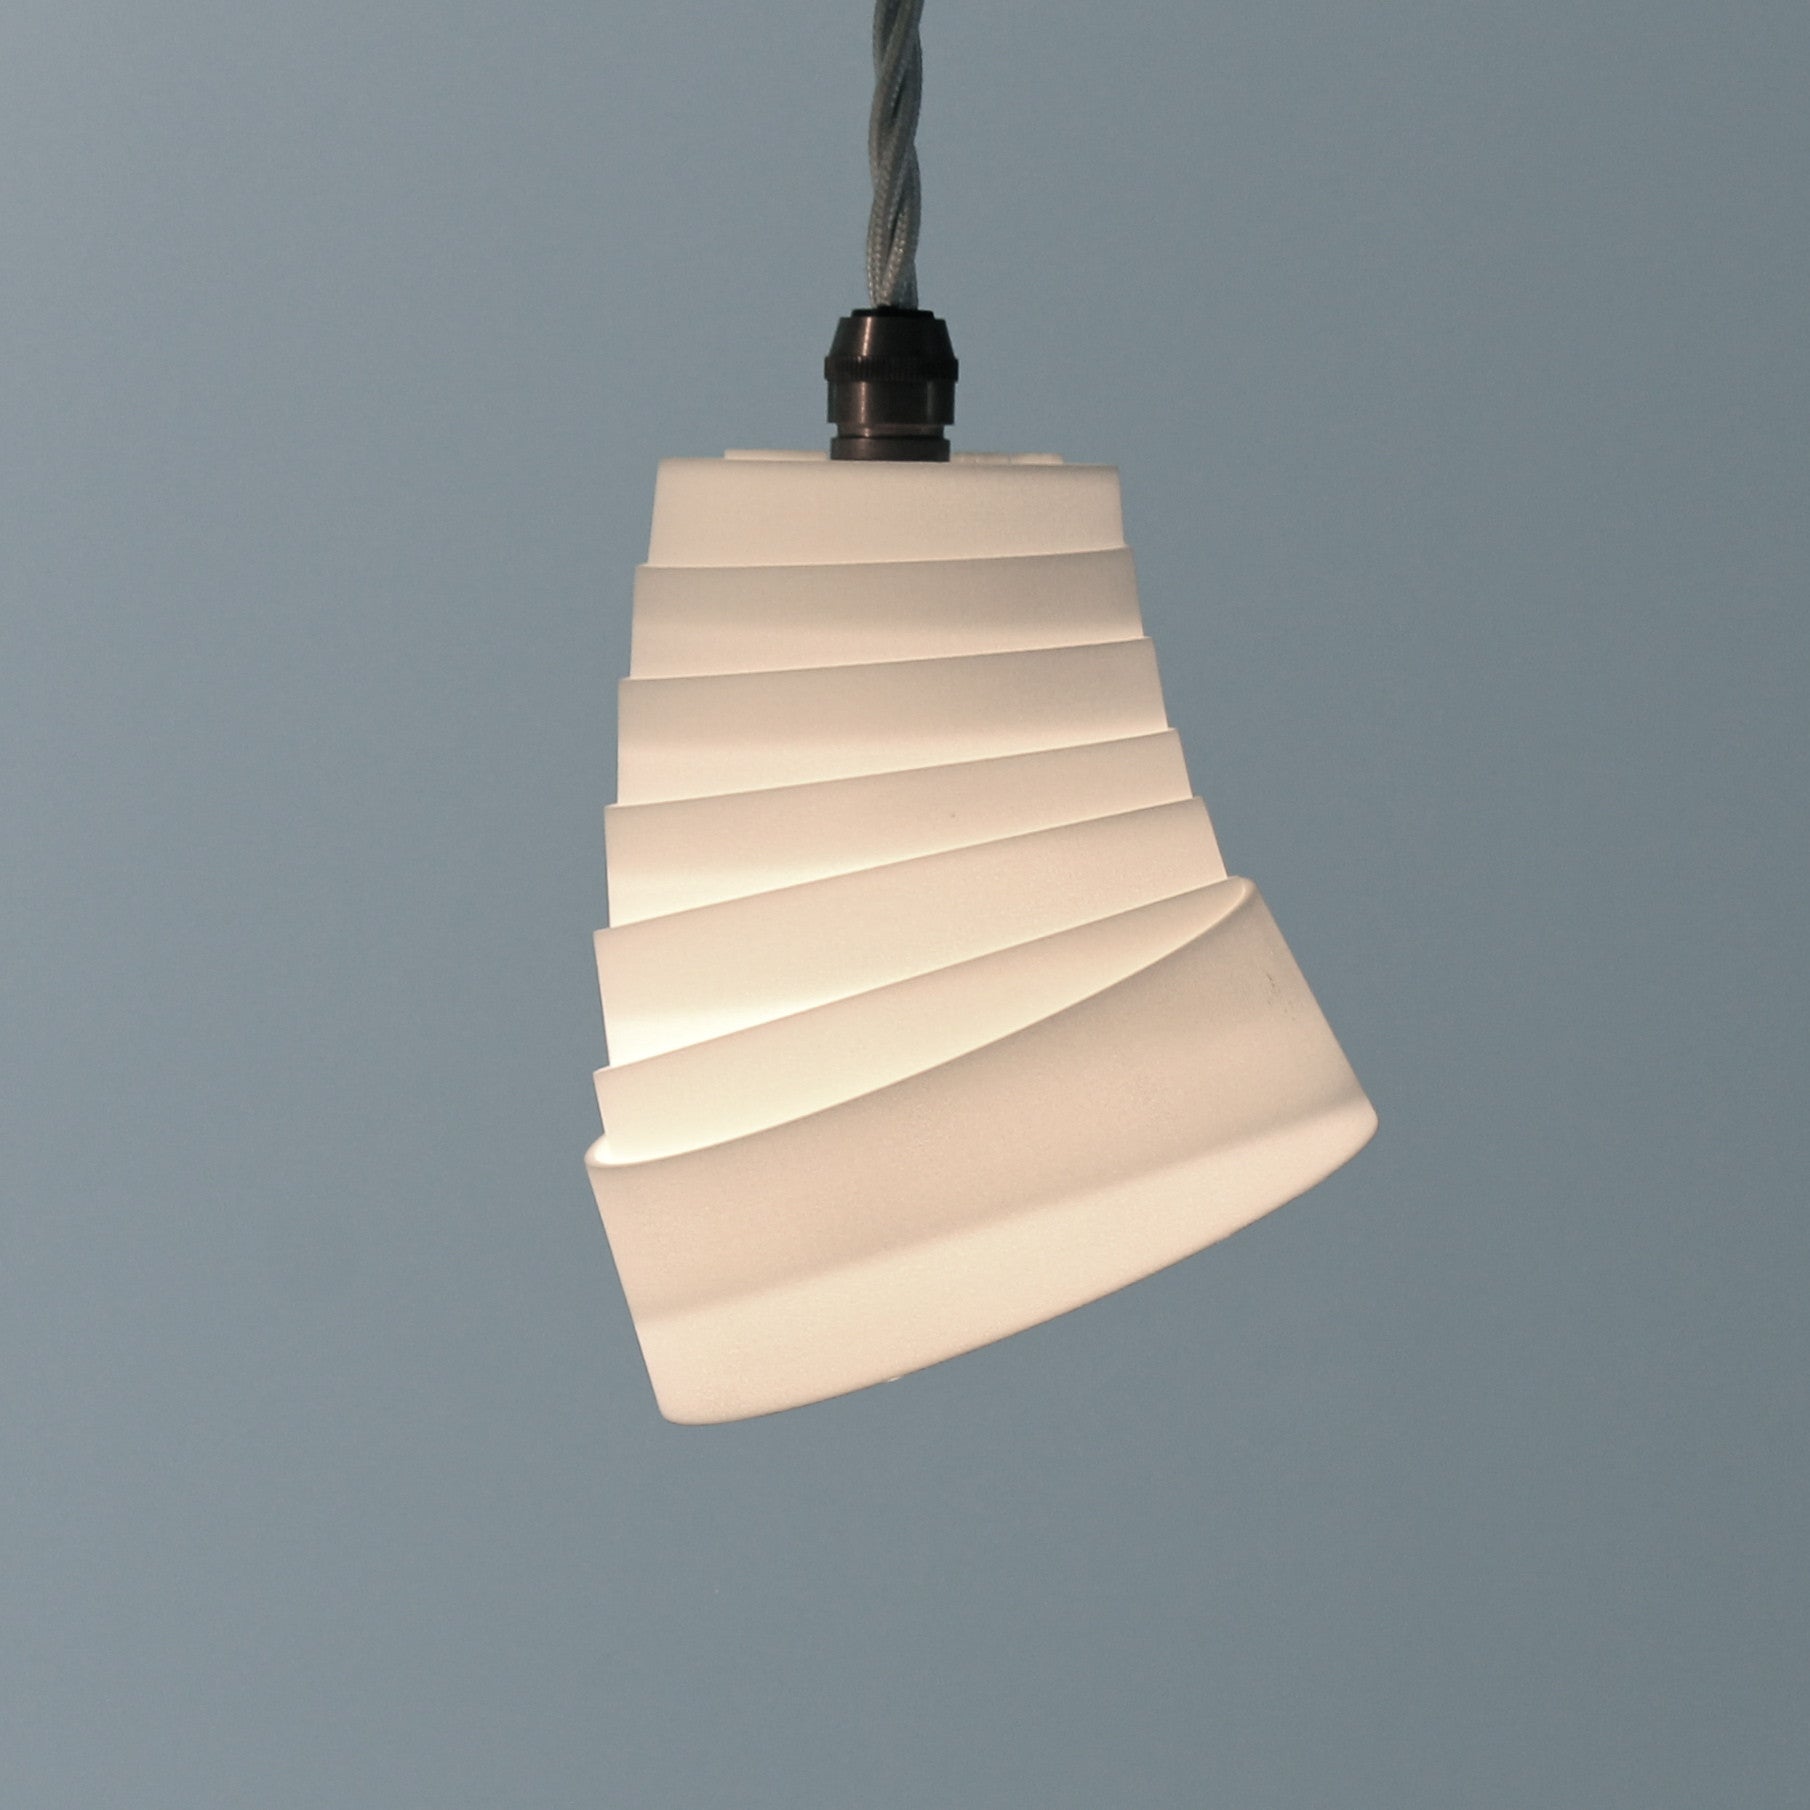 Whip pendant lamp, fine conical rings, lighting, lights, contemporary, white, delicate, interesting, LED, E14, dining, kitchen